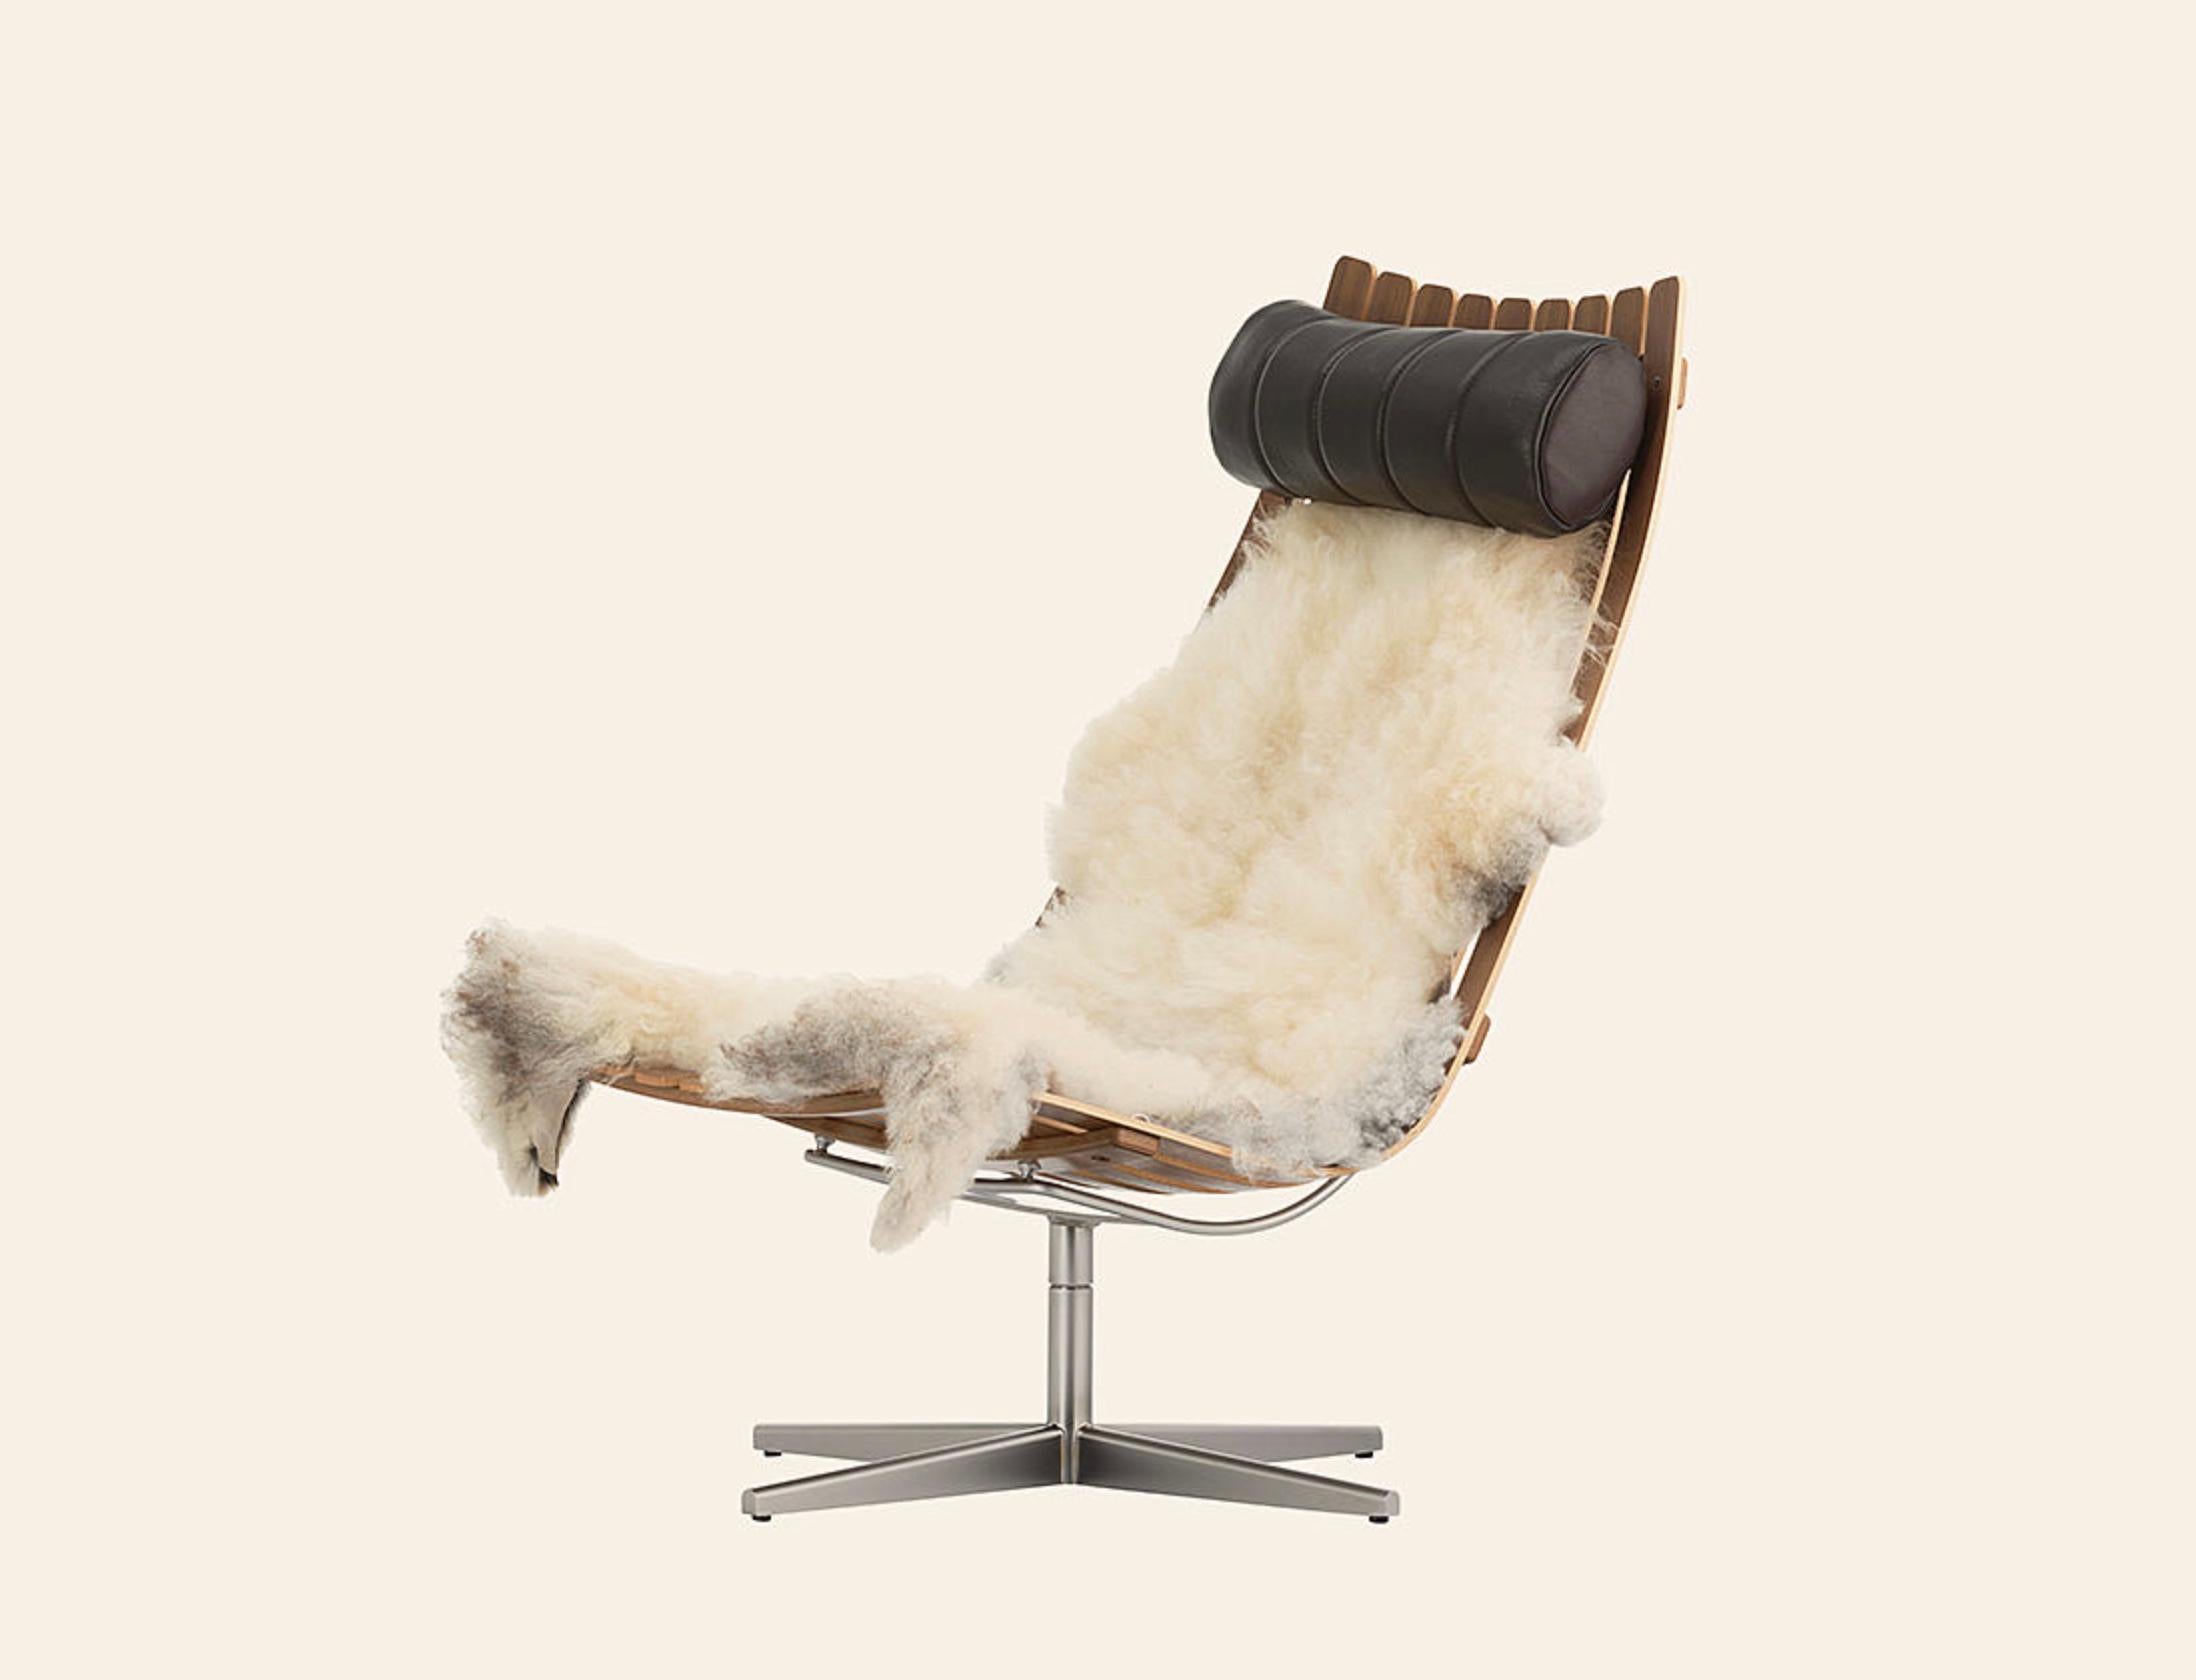 Hans Brattrud 'Scandia' Lounge Chair in Walnut for Fjordfiesta. Designed in 1959. New, current production.

Easy chair in laminated lacquered walnut and satin chrome swivel base. Price includes a headrest in leather and a sheepskin overlay.

About